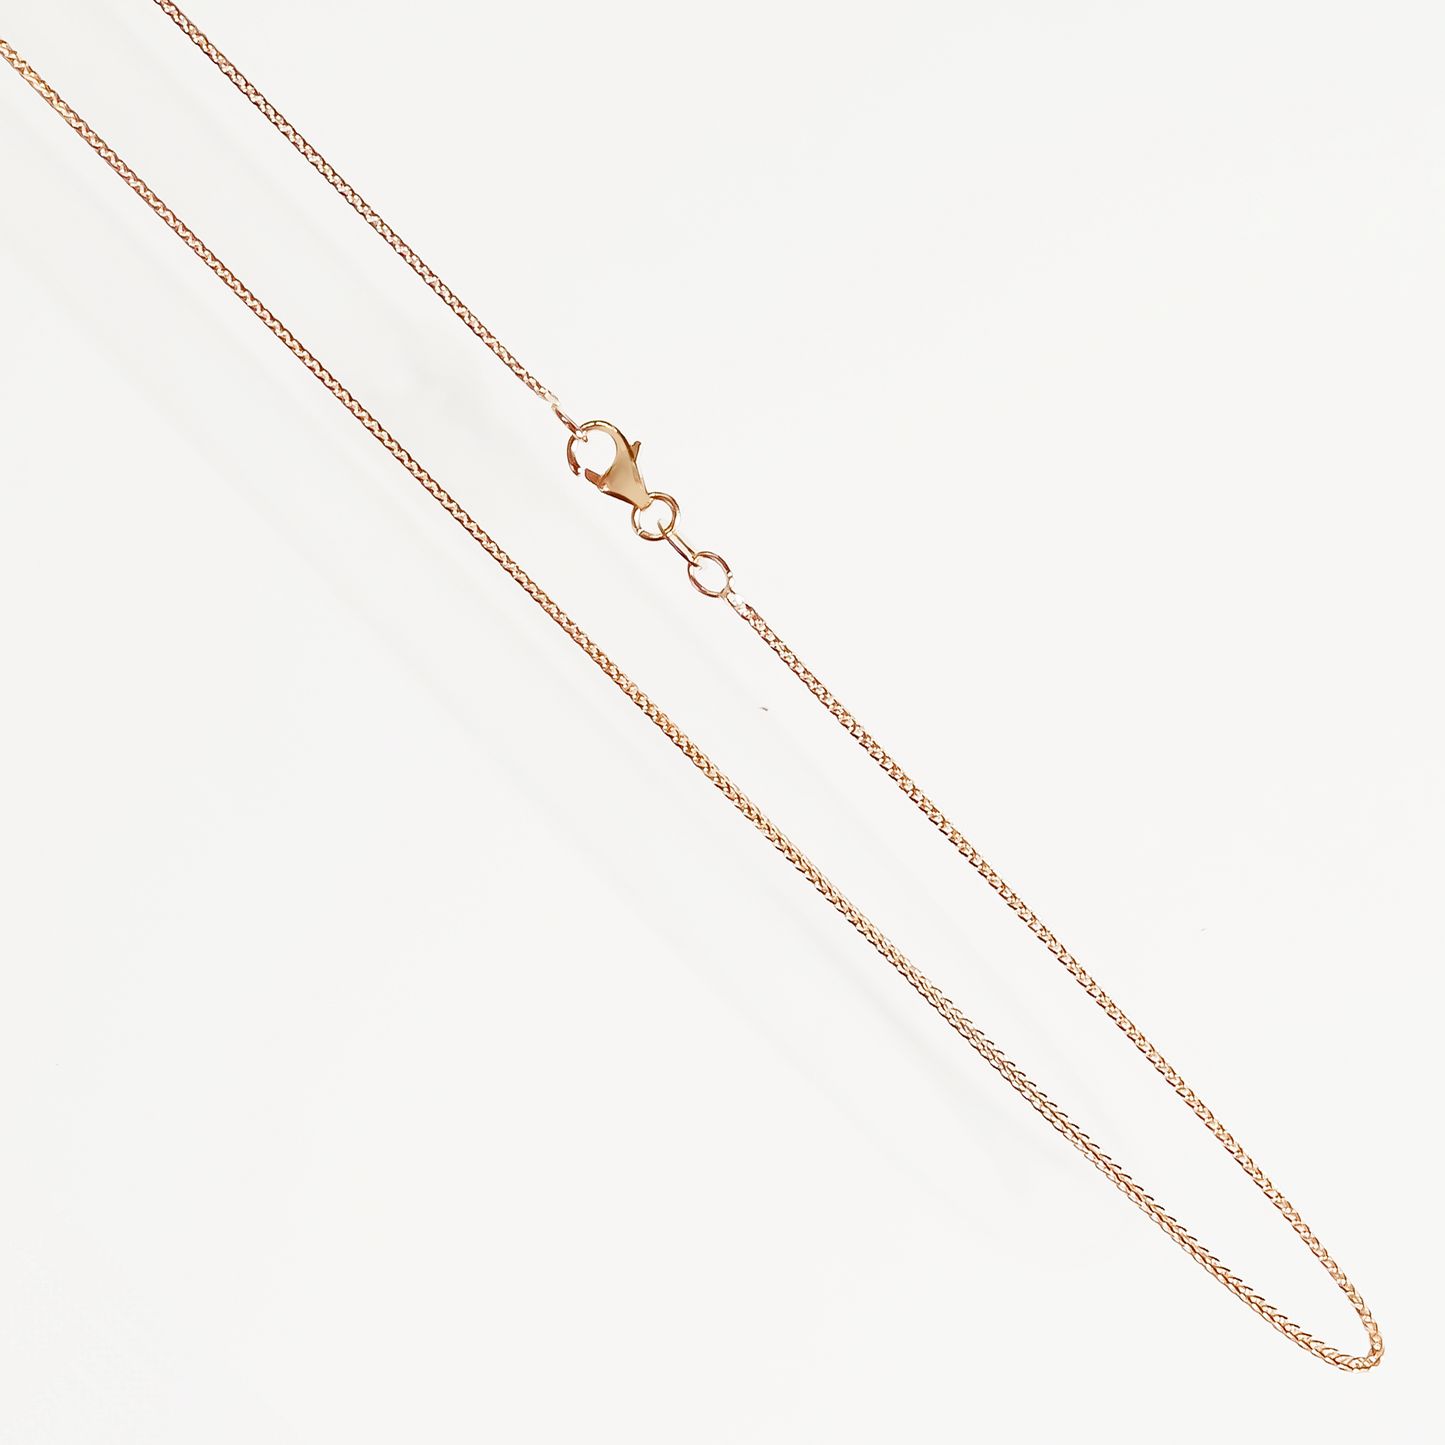 1mm Wheat Link Necklace in 9ct Gold